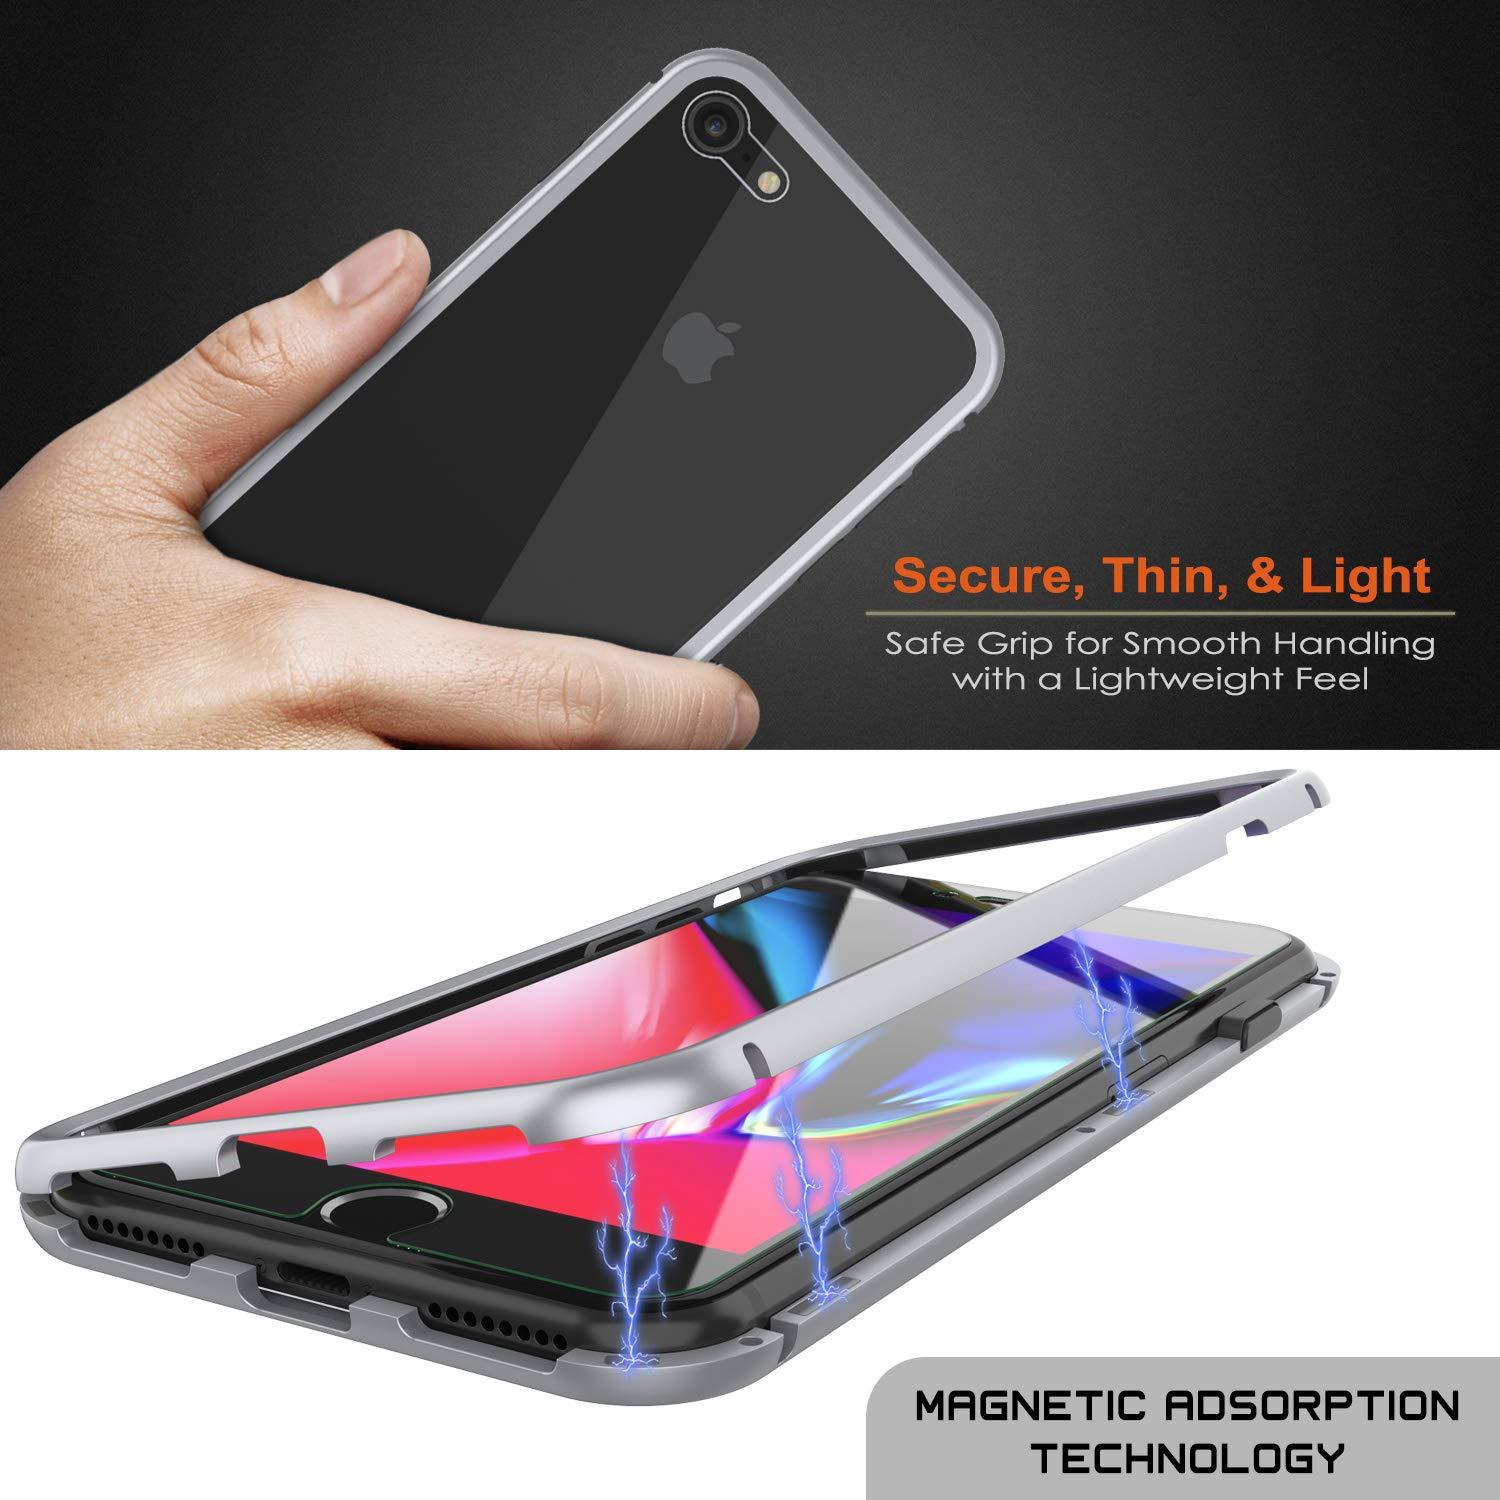 iPhone 8 Case, Punkcase Magnetix 2.0 Protective TPU Cover W/ Tempered Glass Screen Protector [Silver]